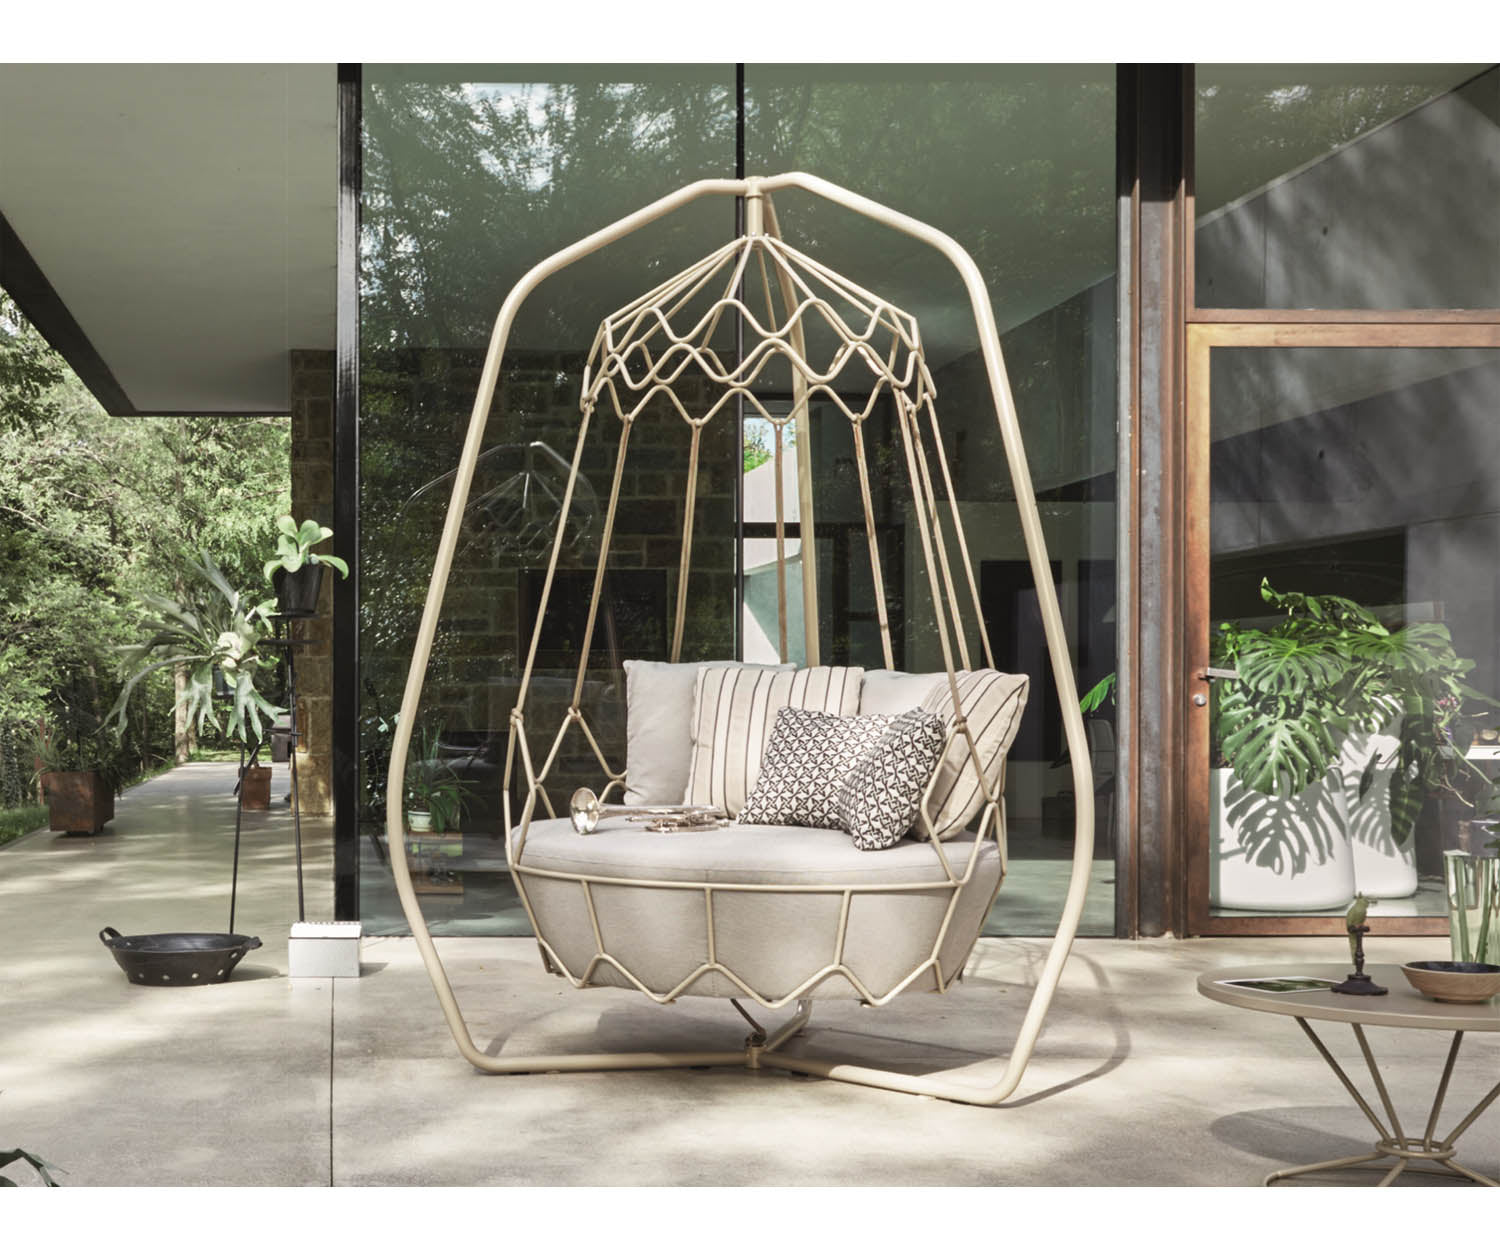 Hanging Swing Chair - patio rattan swing chair by Patricia Urquiola